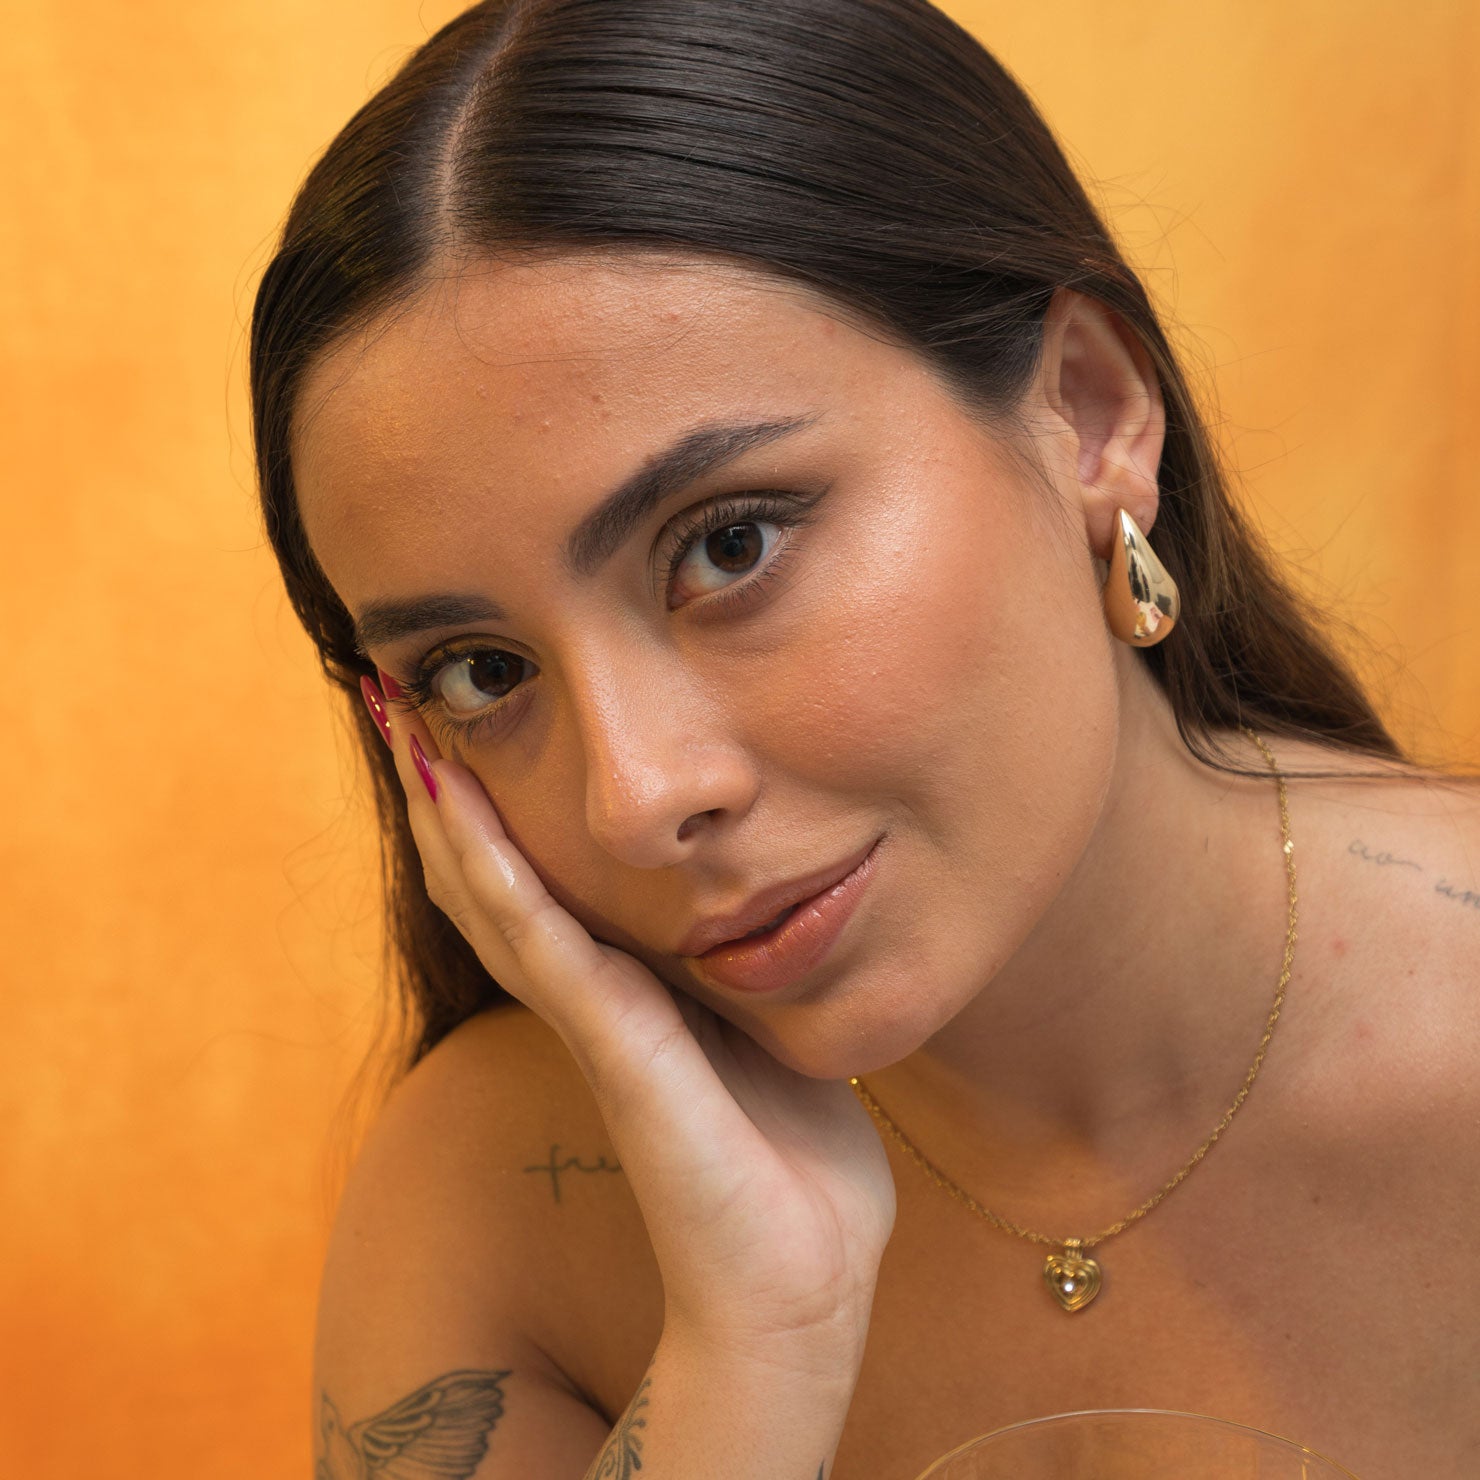 A model wearing the Isla Clip On Earrings in Gold feature a secure screwback closure that fits all ear types, providing an average comfortable wear duration of 8 - 12 hours. The hold strength is strong and you can manually adjust the earrings to your ear size. Constructed of gold toned copper alloy, this item is a single pair.